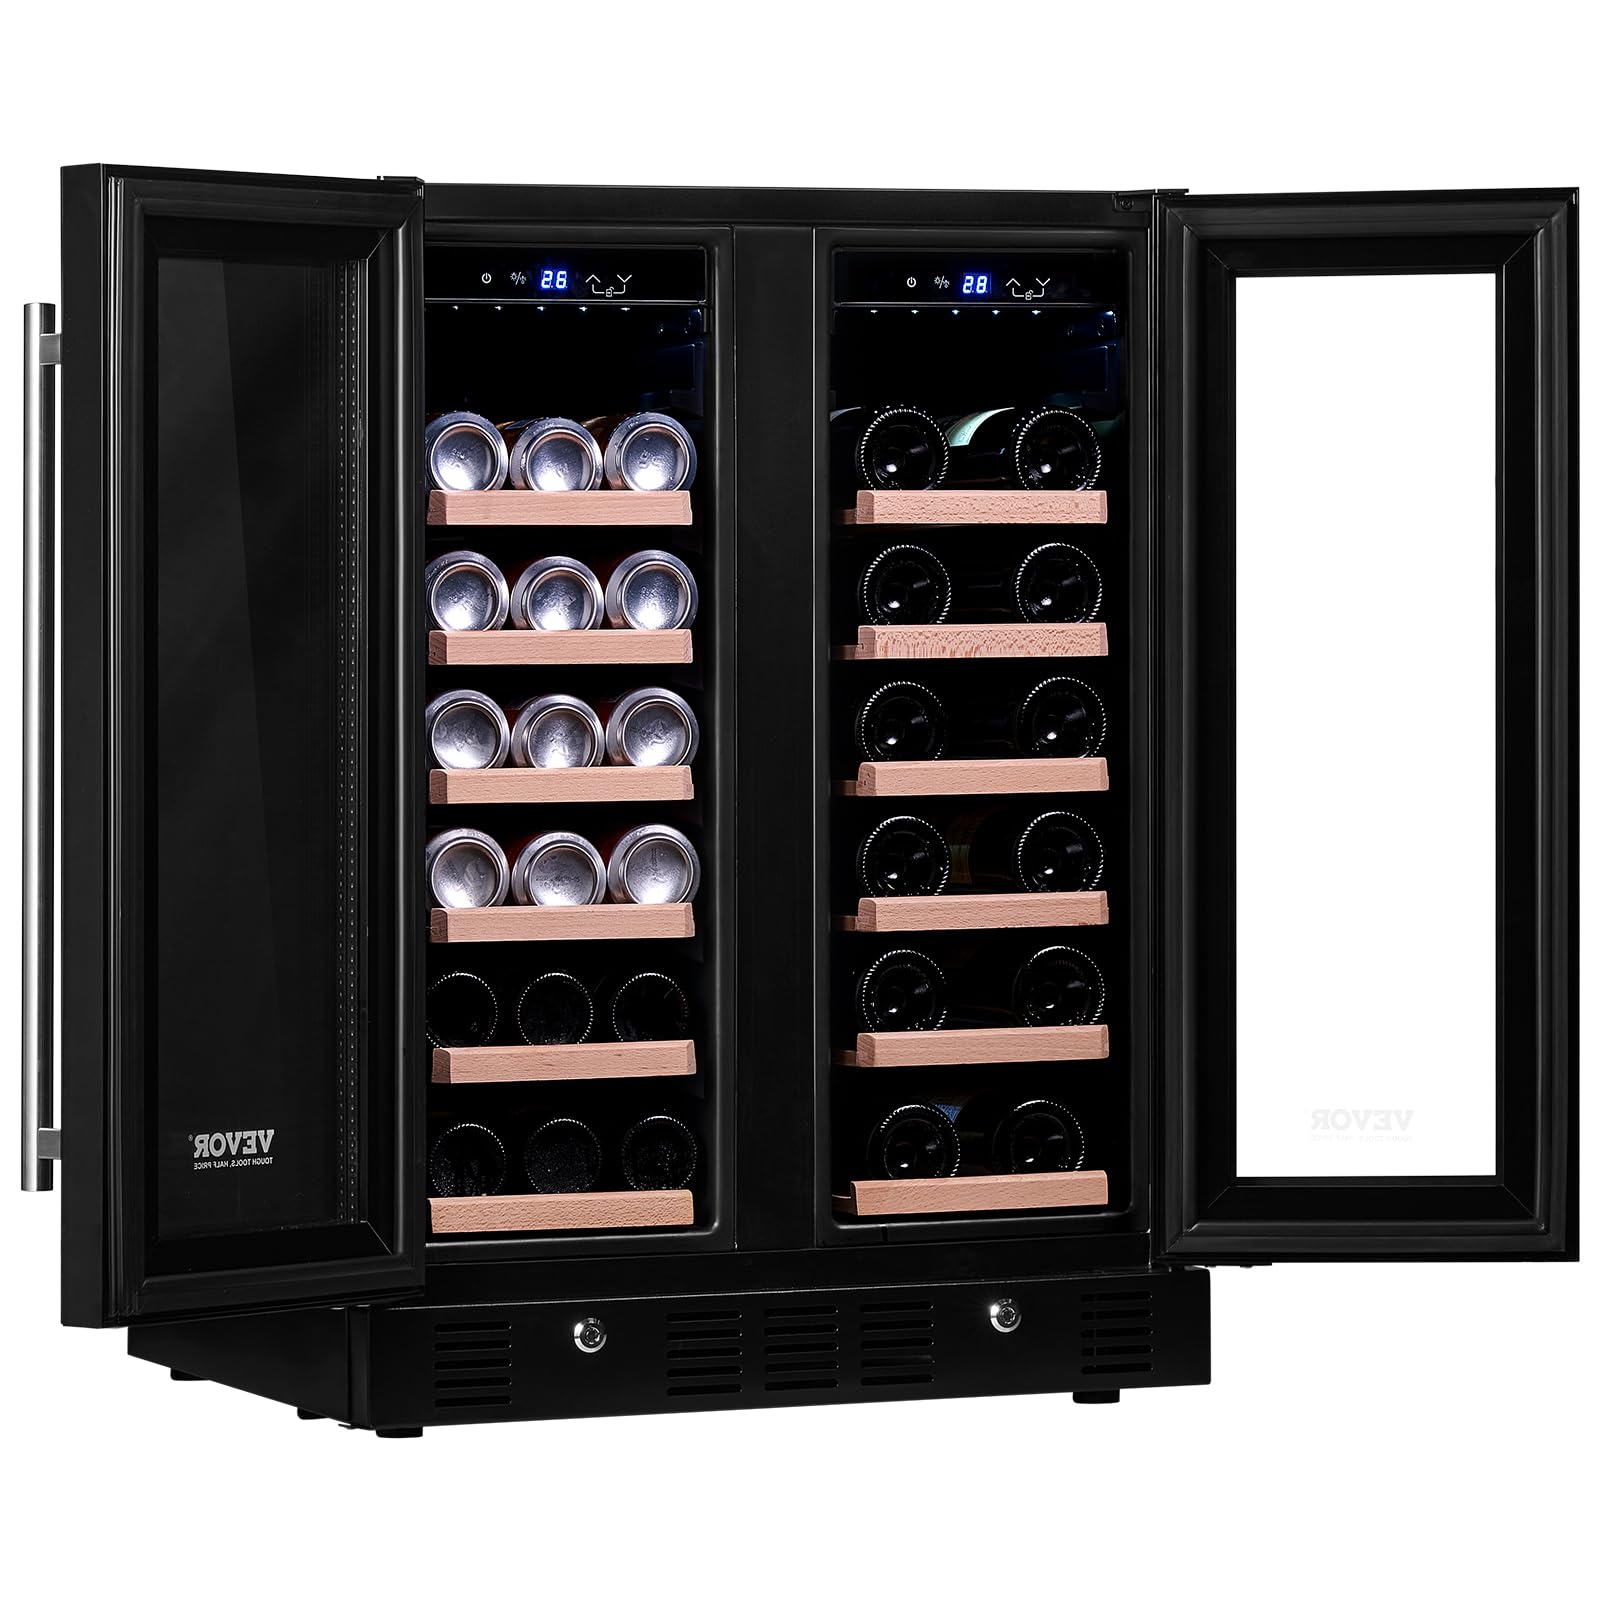 VEVOR 78 Cans and 20 Bottles Dual Zone Wine Refrigerator 24” Beverage Cooler with Digital Temperature Control, Tempered Glass Door, Child Lock, Low Noise, Freestanding or Built-in, ETL, Black